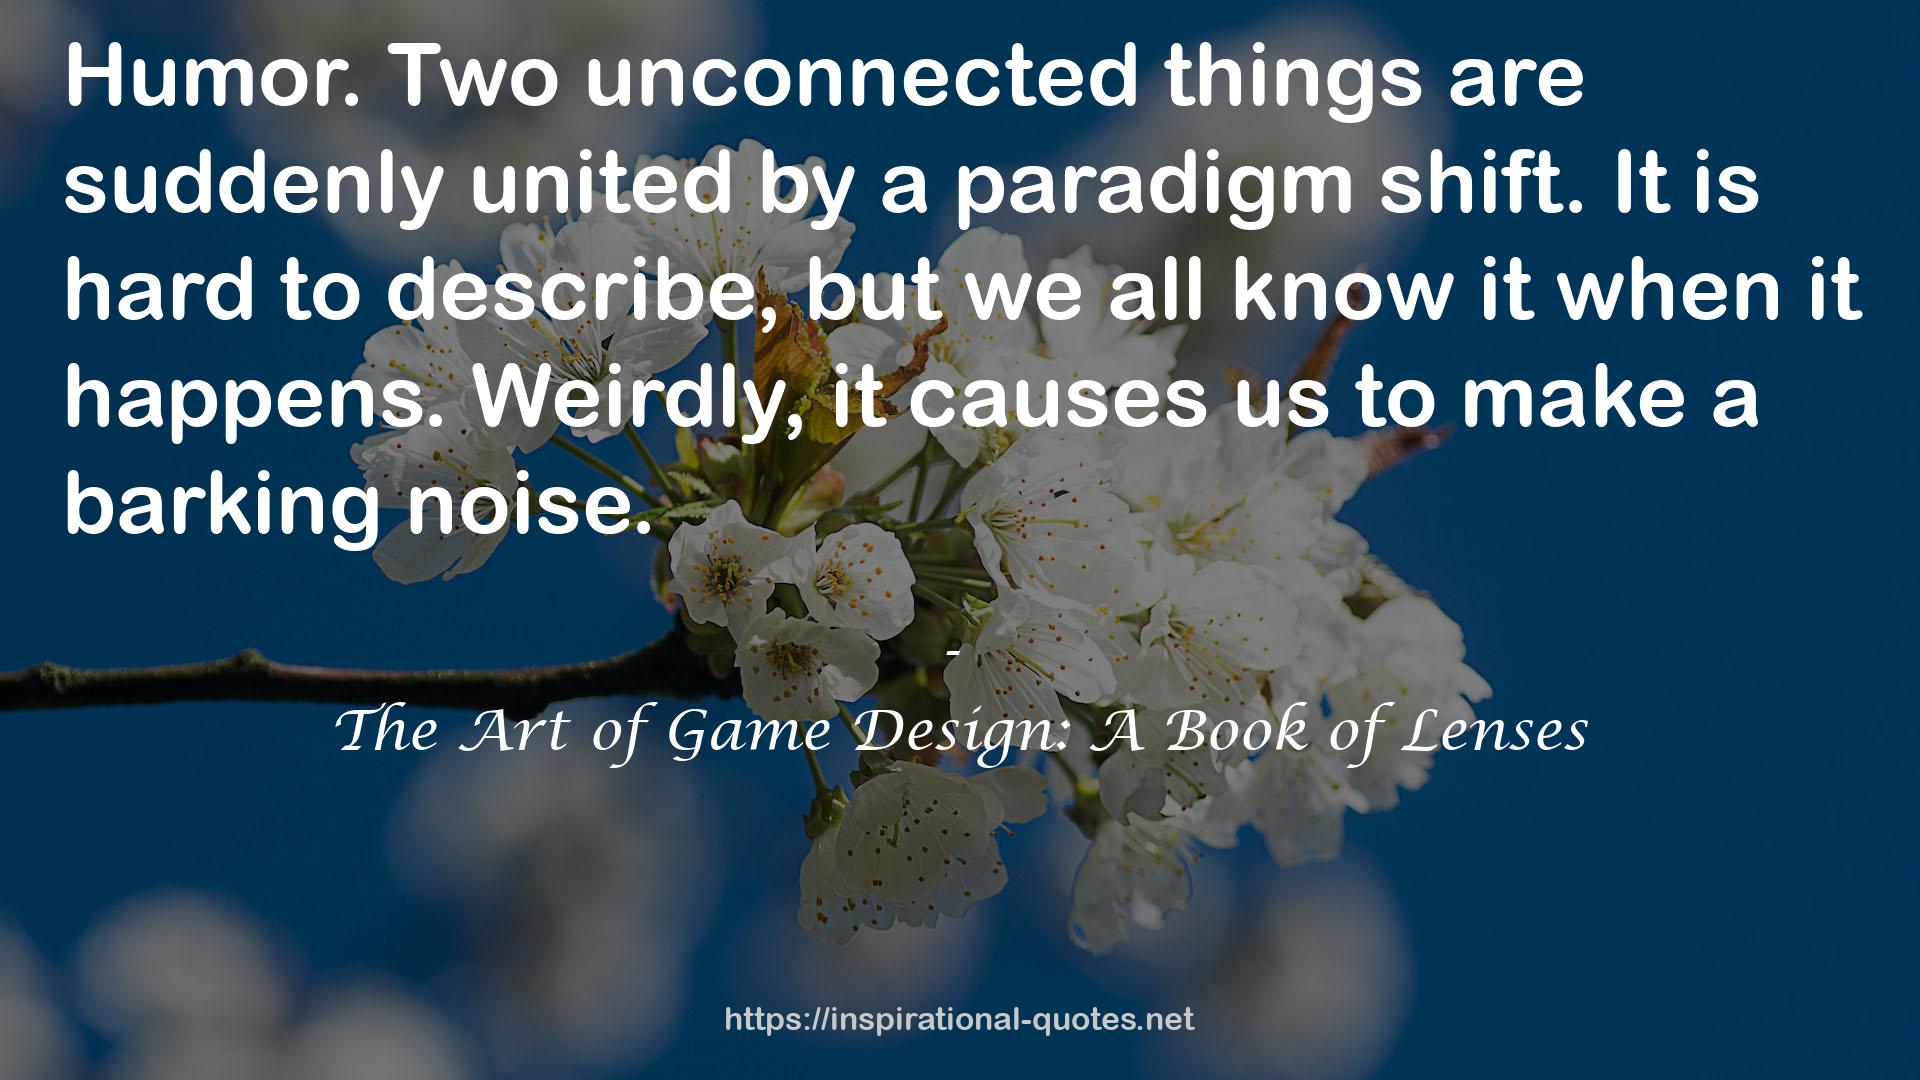 The Art of Game Design: A Book of Lenses QUOTES